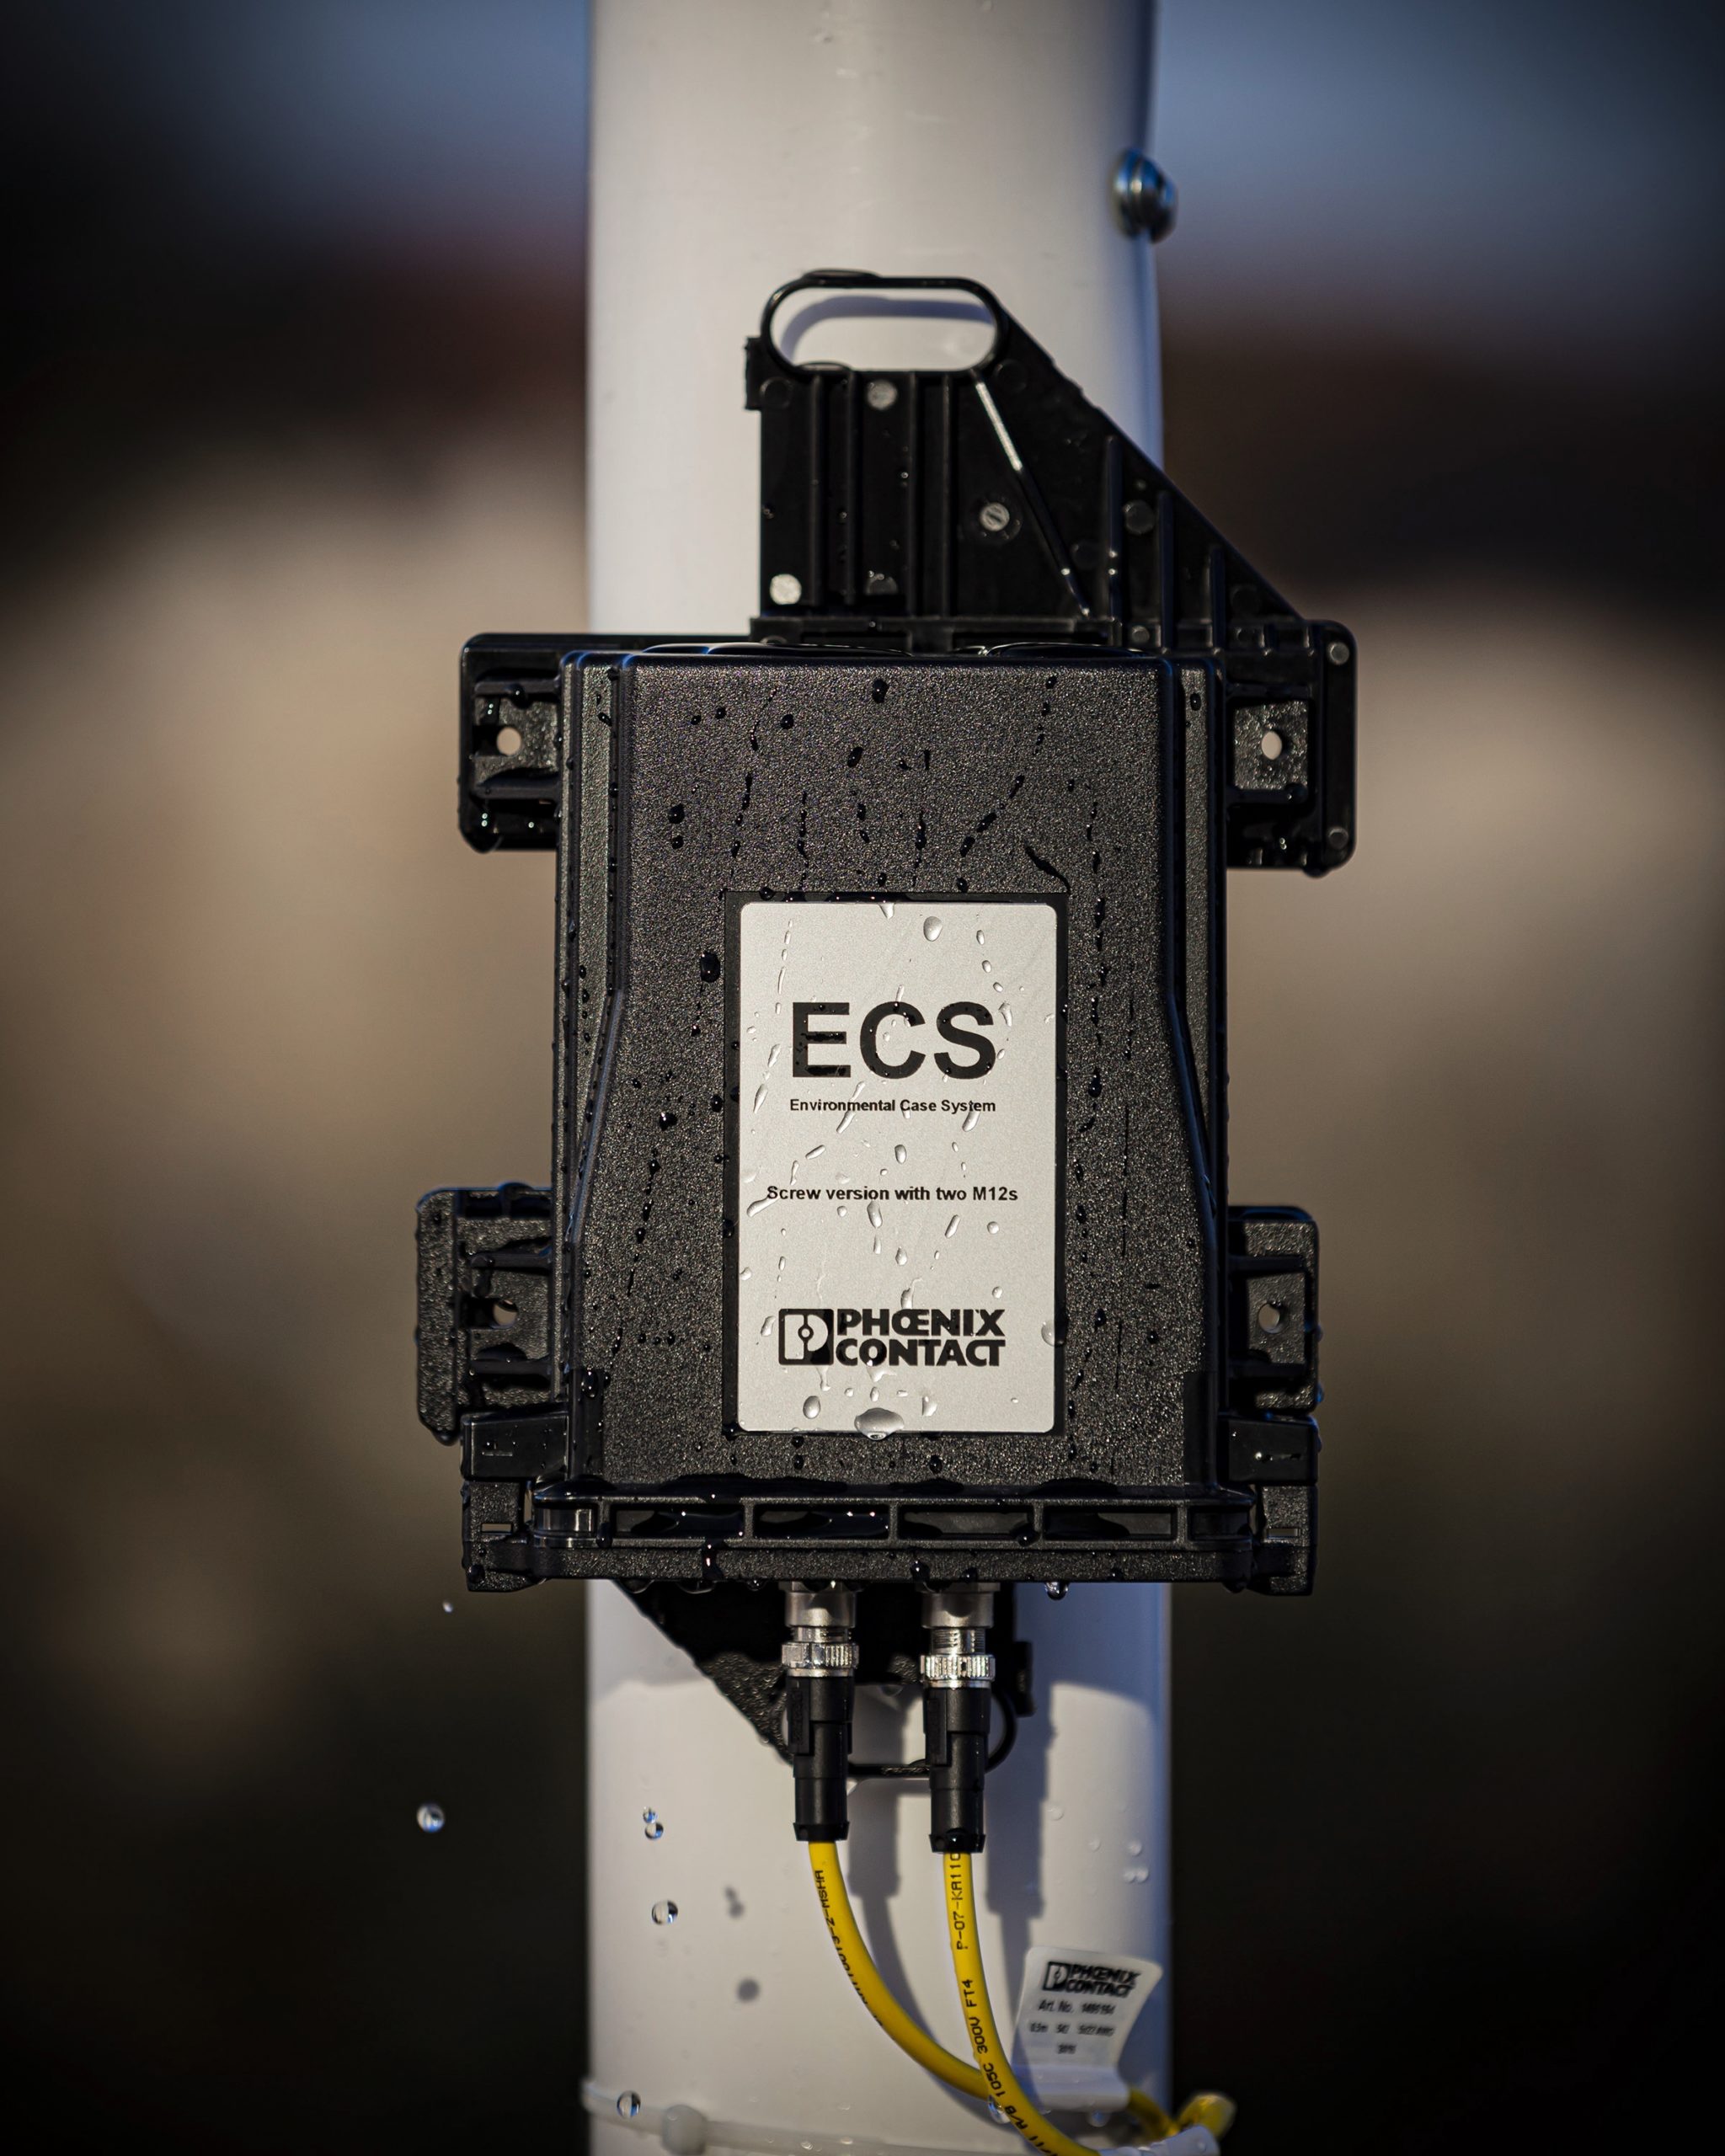 Robust outdoor housings from Phoenix Contact’s ECS series